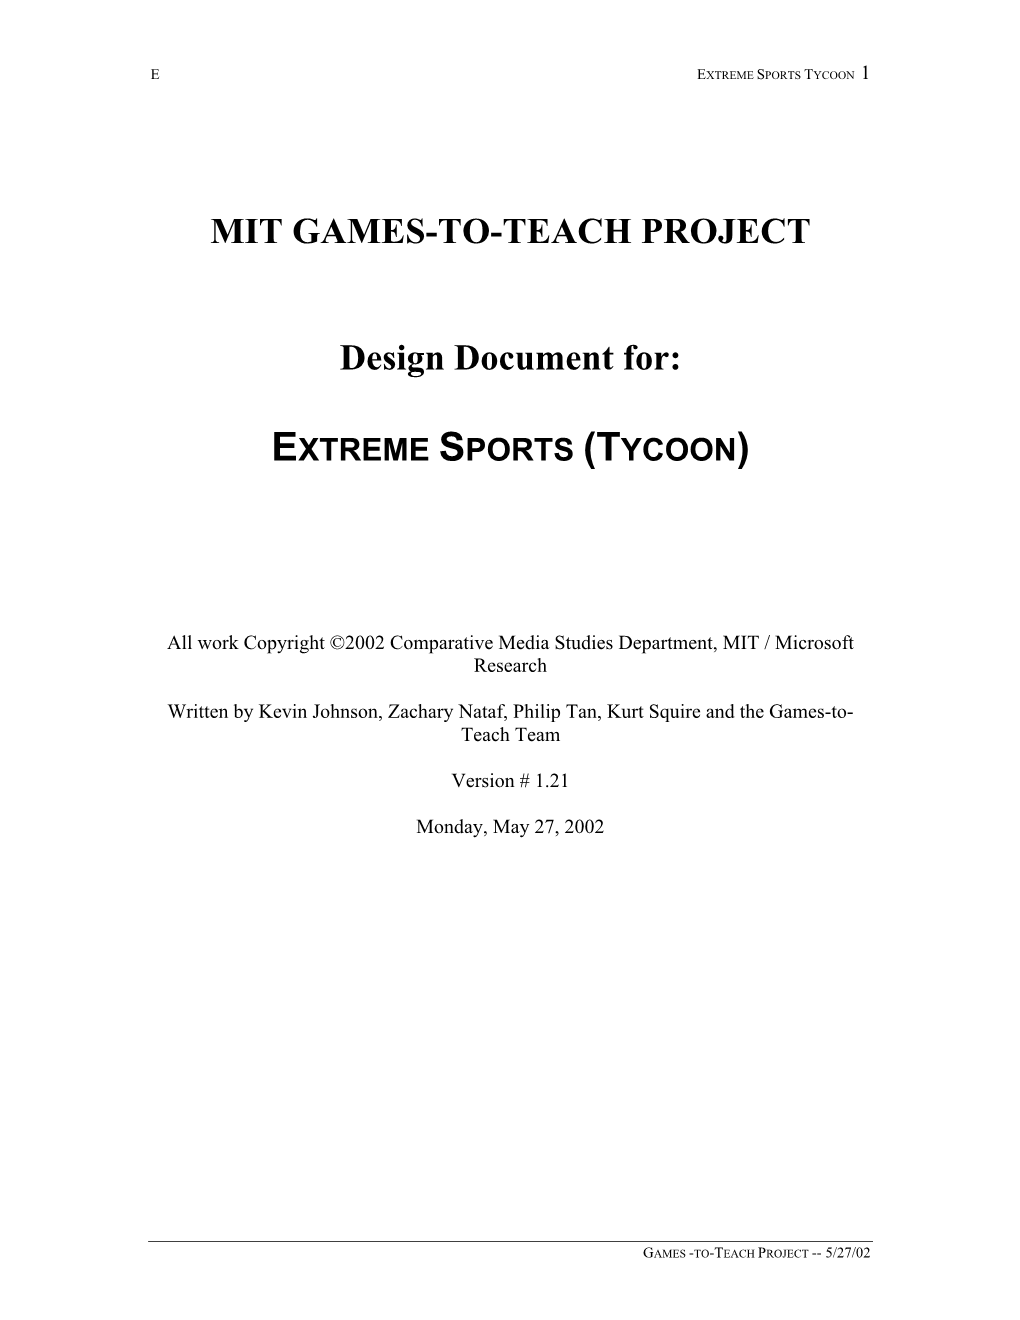 MIT GAMES-TO-TEACH PROJECT Design Document For: EXTREME SPORTS